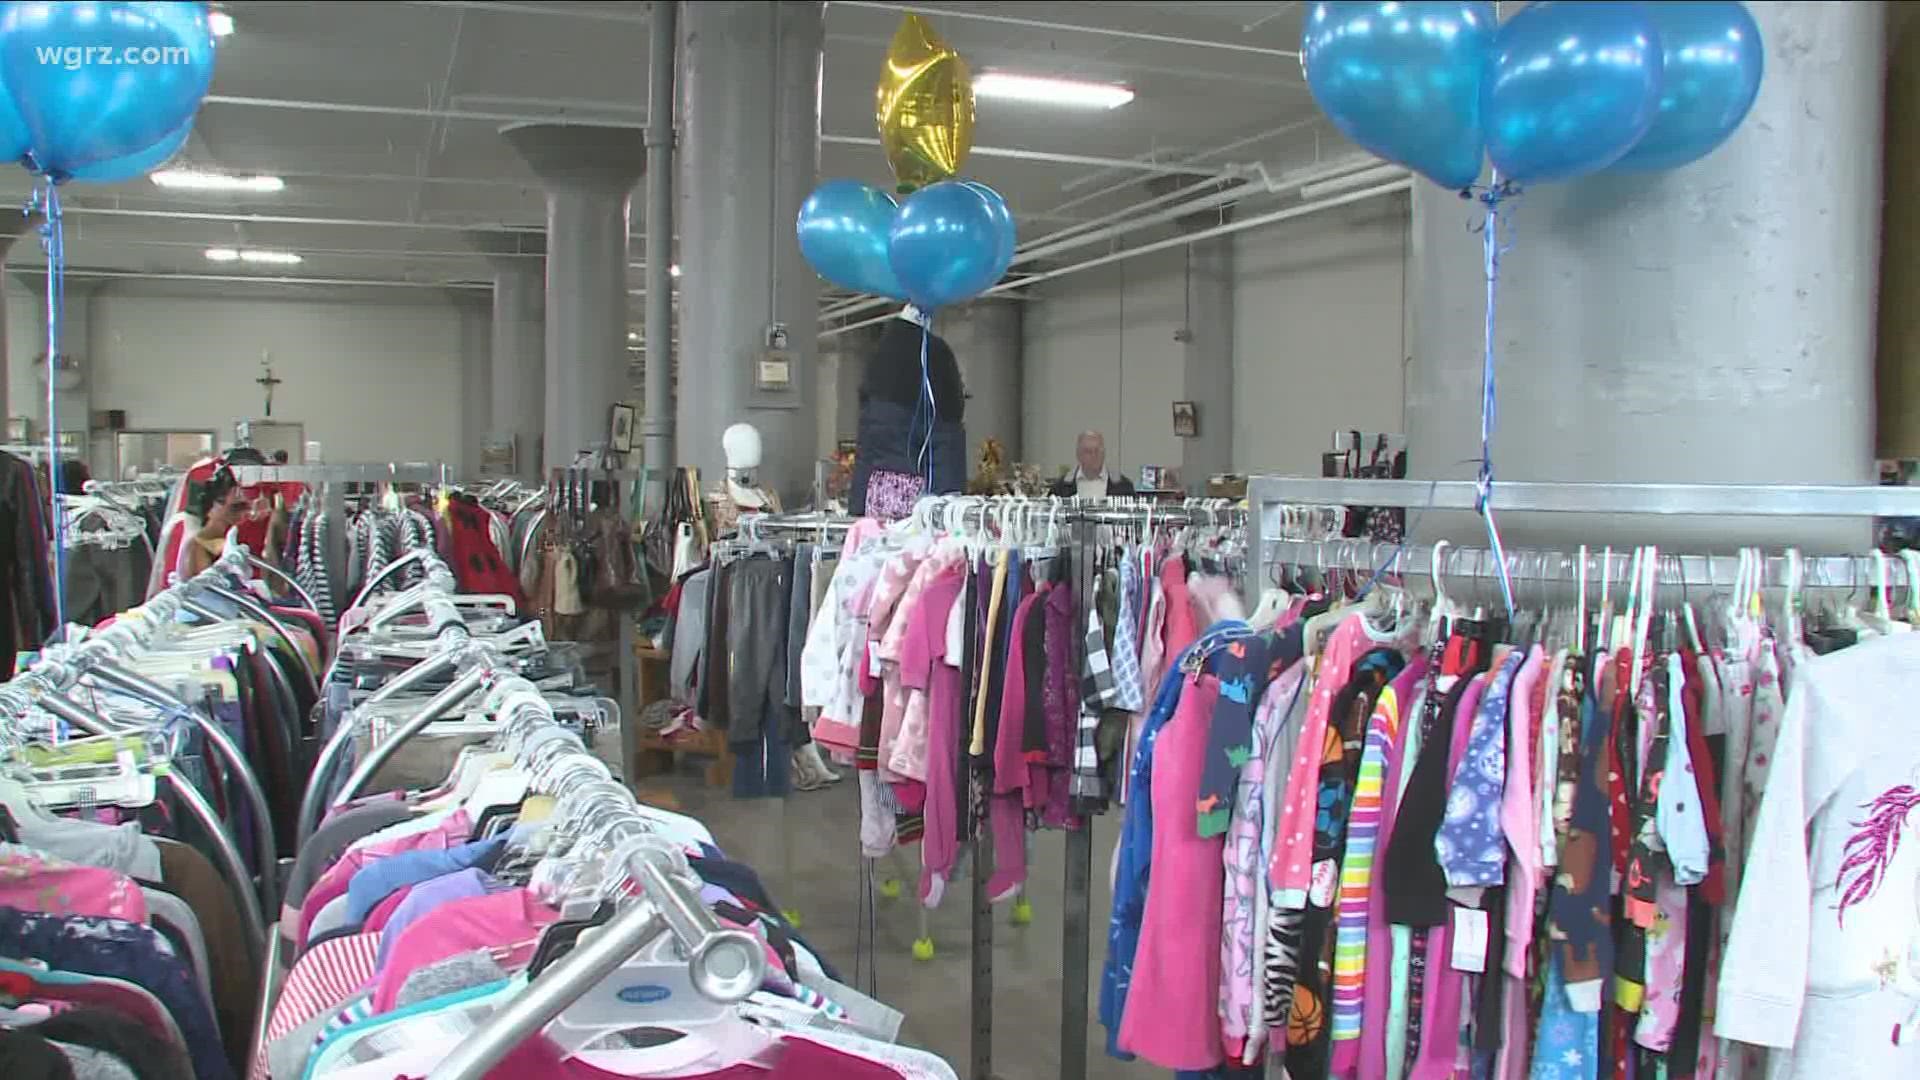 The Society of St. Vincent de Paul says the store has become a staple of the neighborhood.